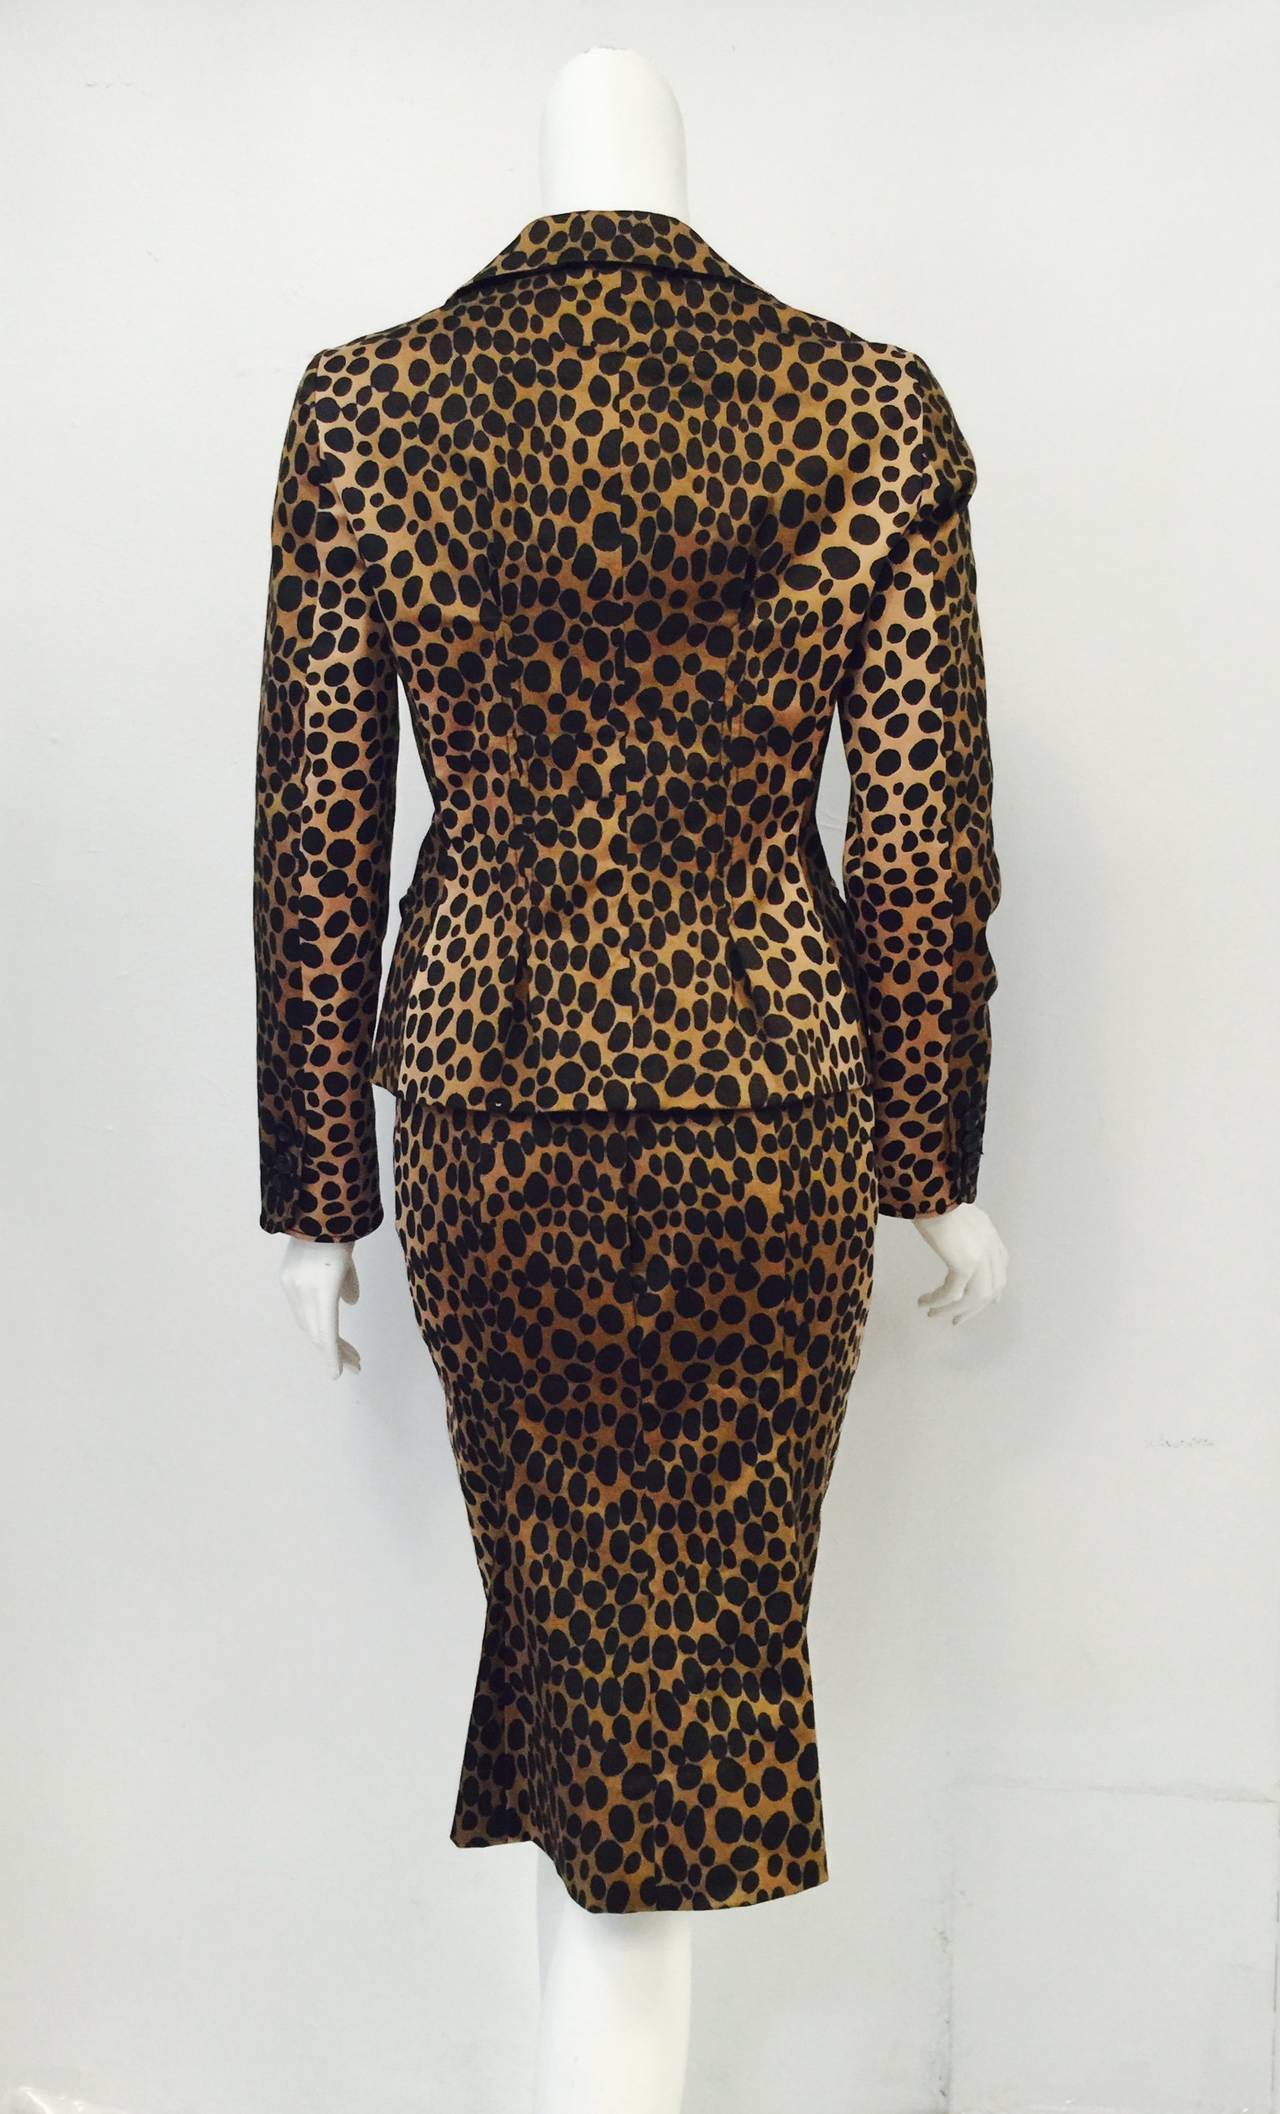 Moschino Cheap and Chic Cotton Stretch Skirt Suit is truly magnificent!  Features luxurious stretch fabric, exotic leopard print all over, fitted, peaked lapel jacket and knee length skirt.  Jacket has two flap pockets, three button front closure